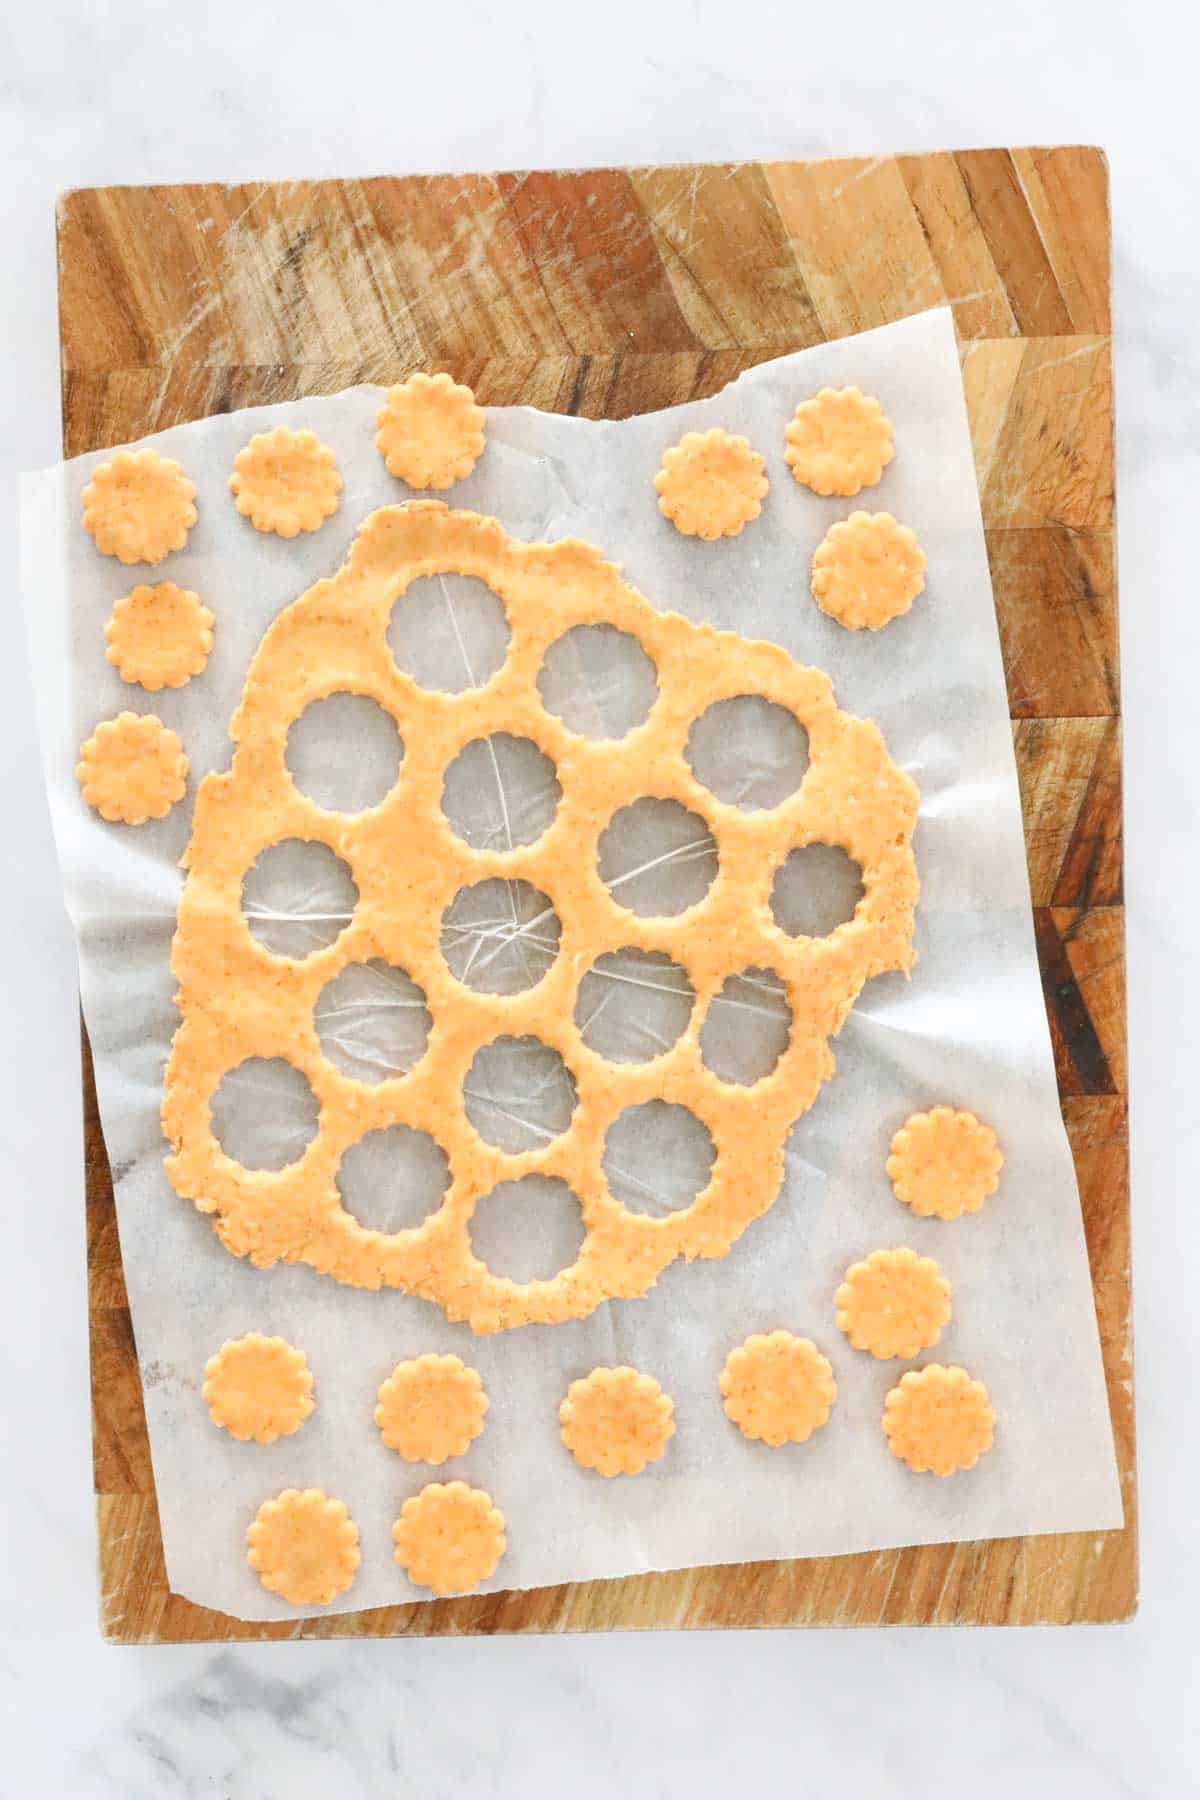 Crackers being cut out from dough.